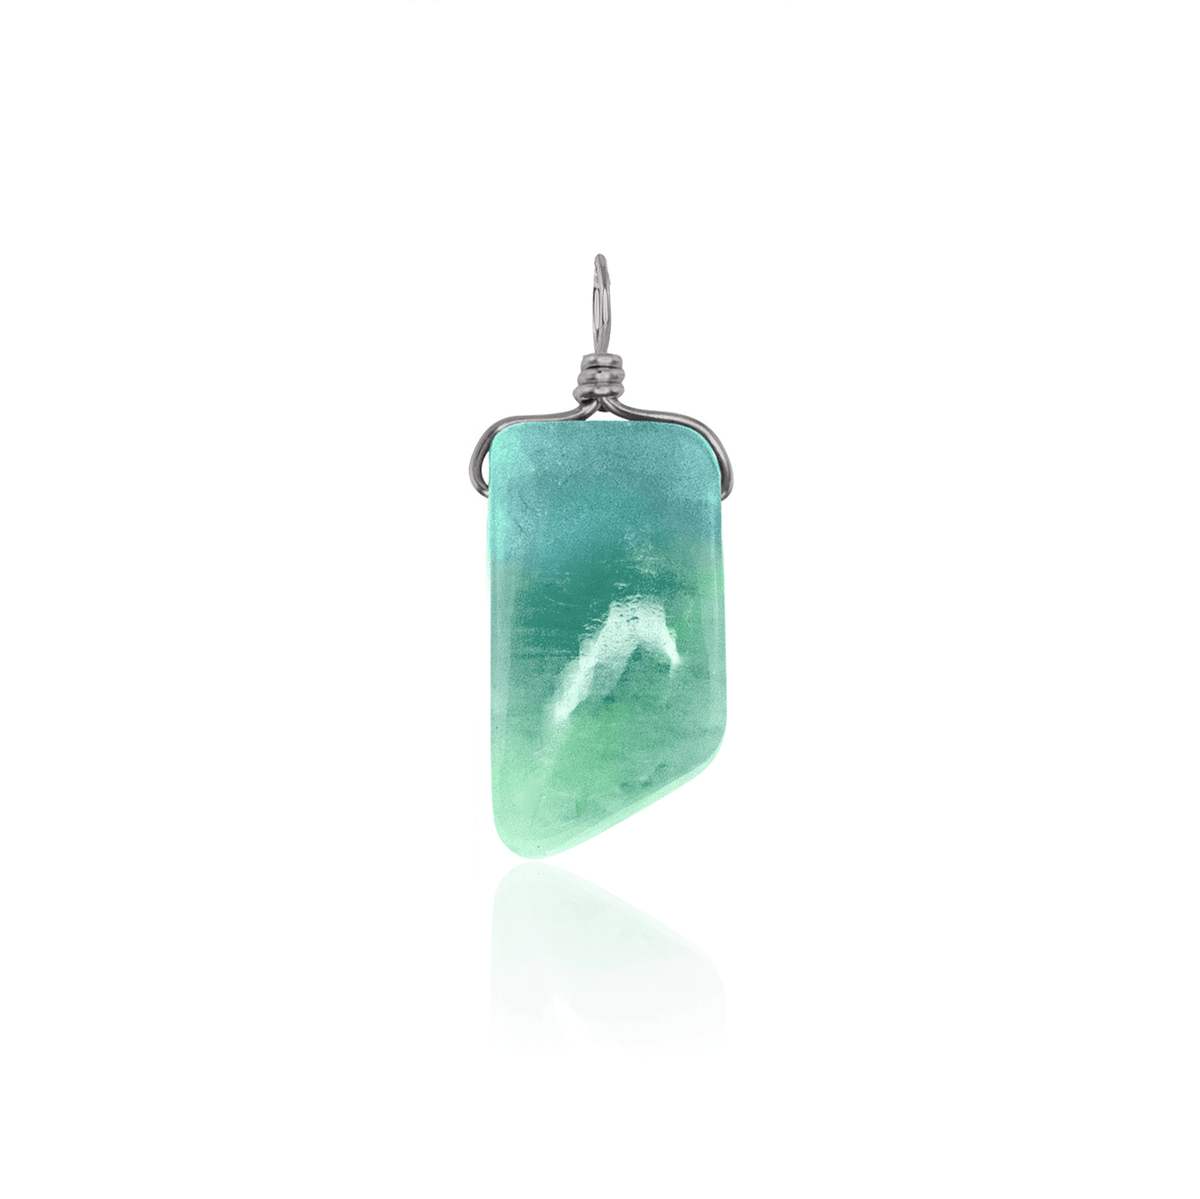 Small Smooth Amazonite Crystal Pendant with Gentle Point - Small Smooth Amazonite Crystal Pendant with Gentle Point - Stainless Steel - Luna Tide Handmade Crystal Jewellery